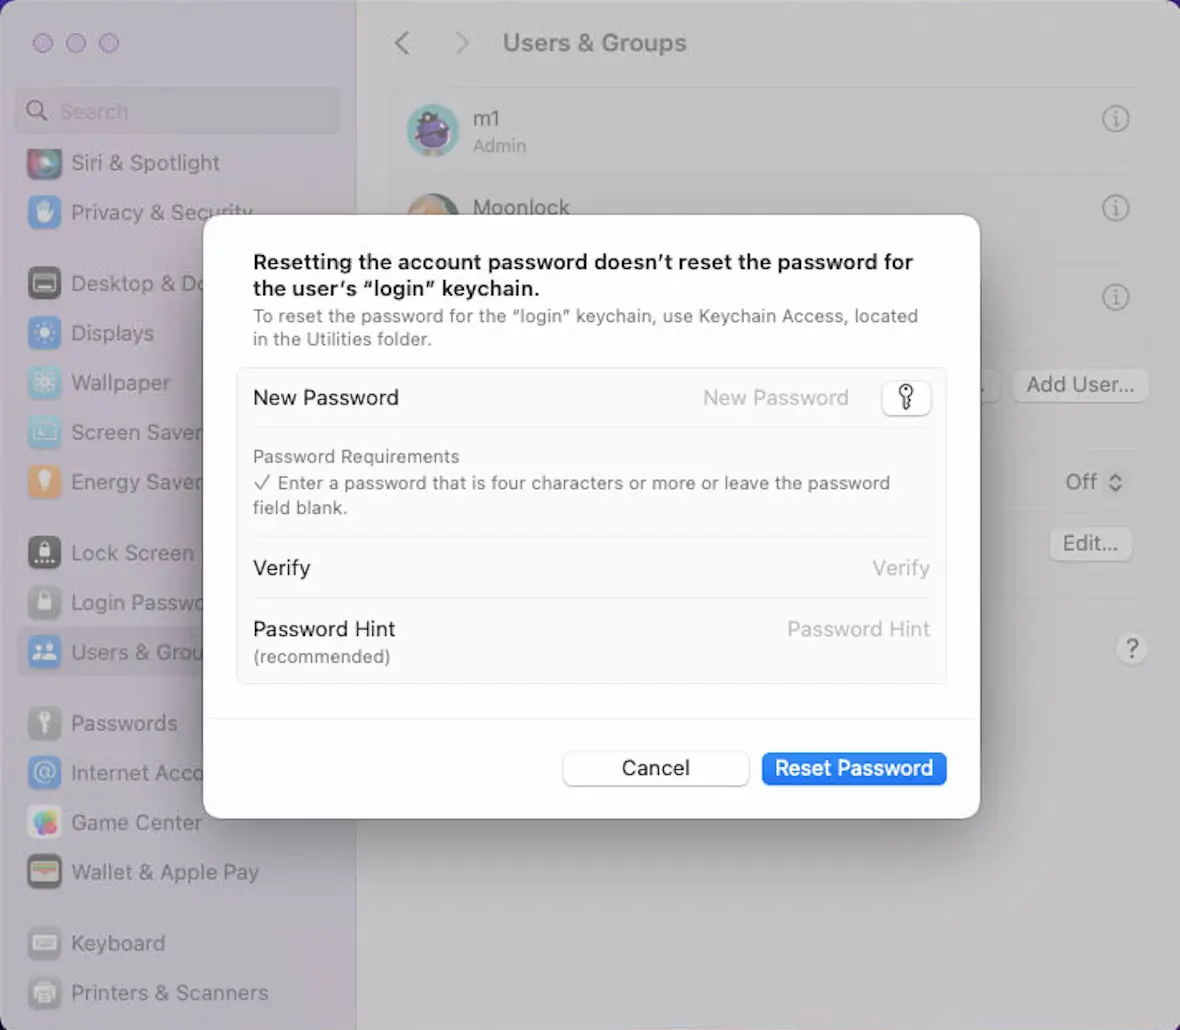 A screenshot showing how to set a password hint on MacBook or Mac devices.